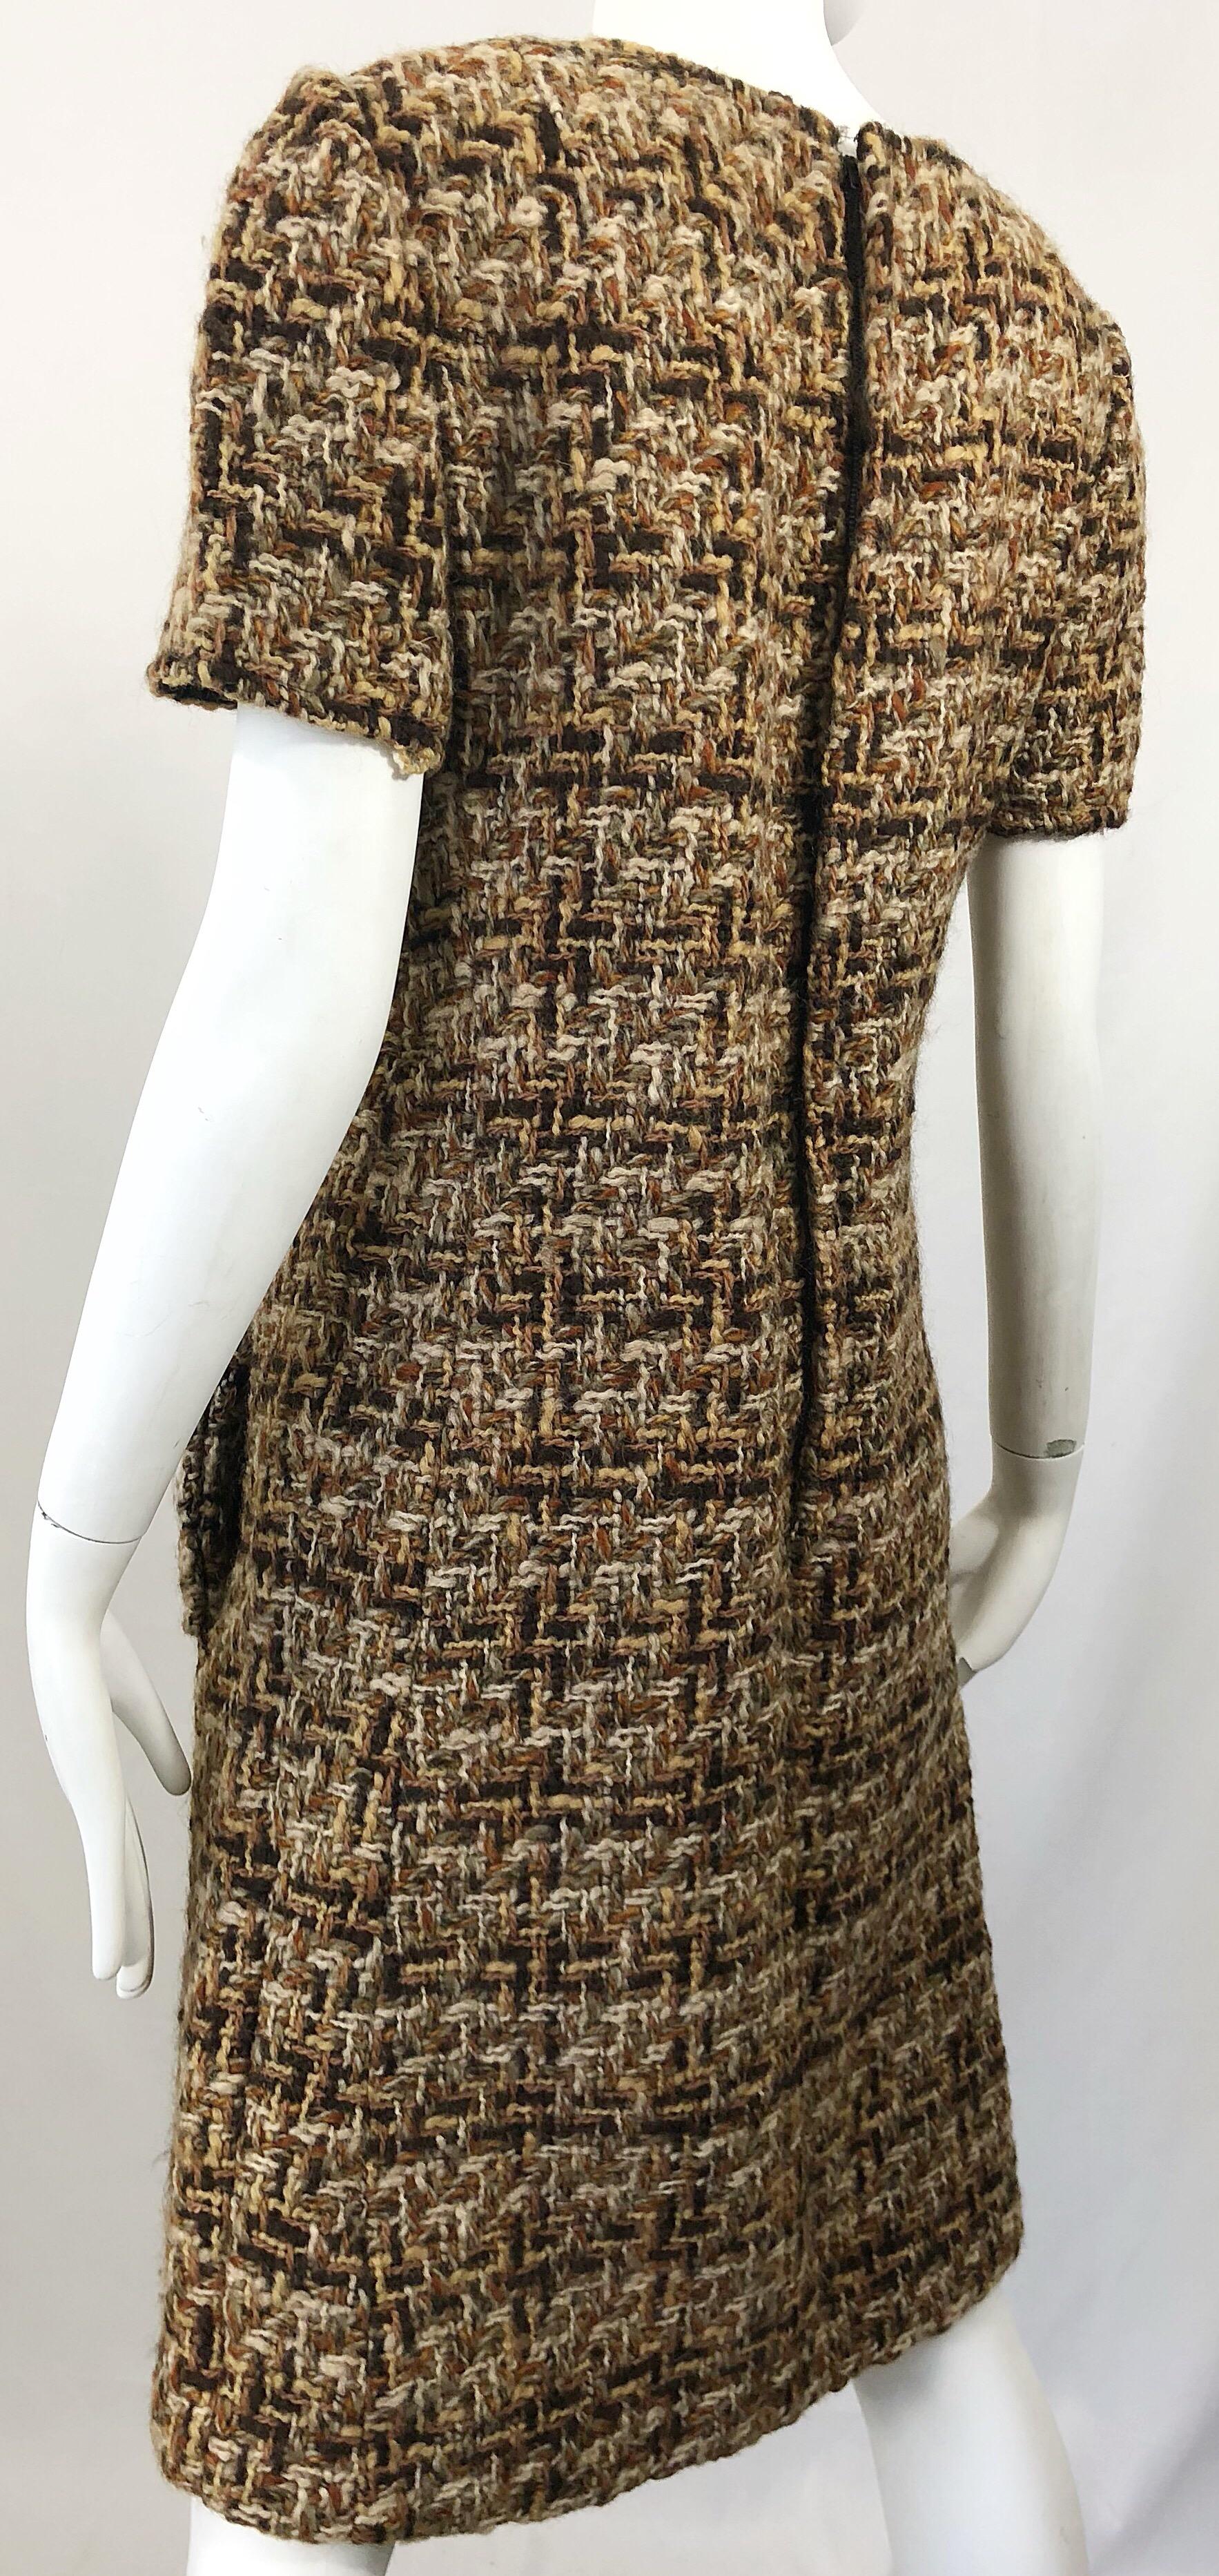 Chic 1960s Brown + Taupe Boucle Woven Short Sleeve Vintage 60s Shift Dress In Excellent Condition For Sale In San Diego, CA